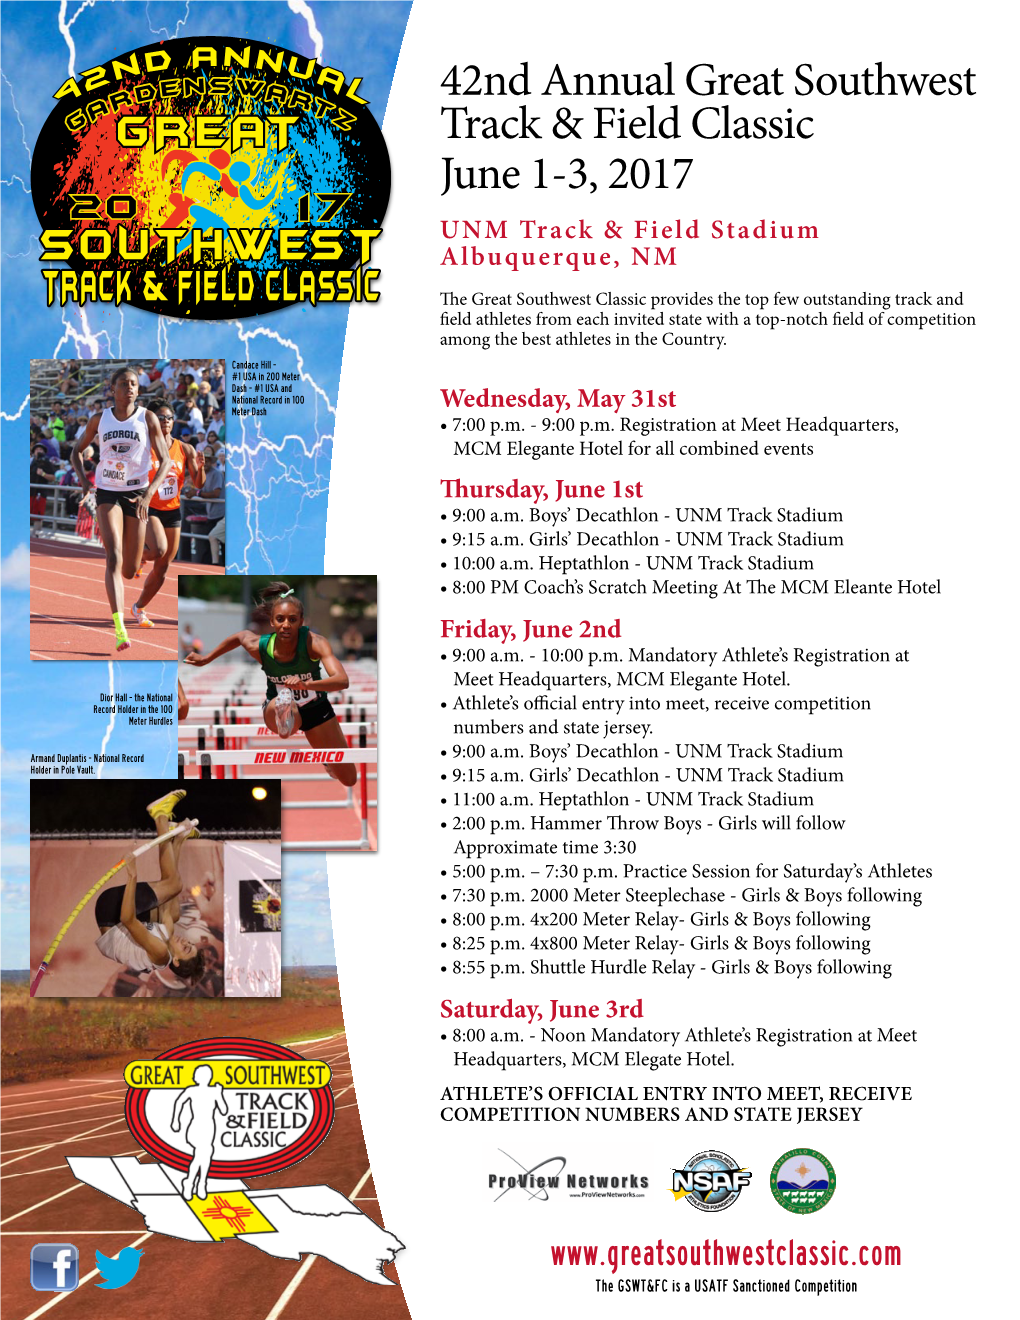 42Nd Annual Great Southwest Track & Field Classic June 1-3, 2017